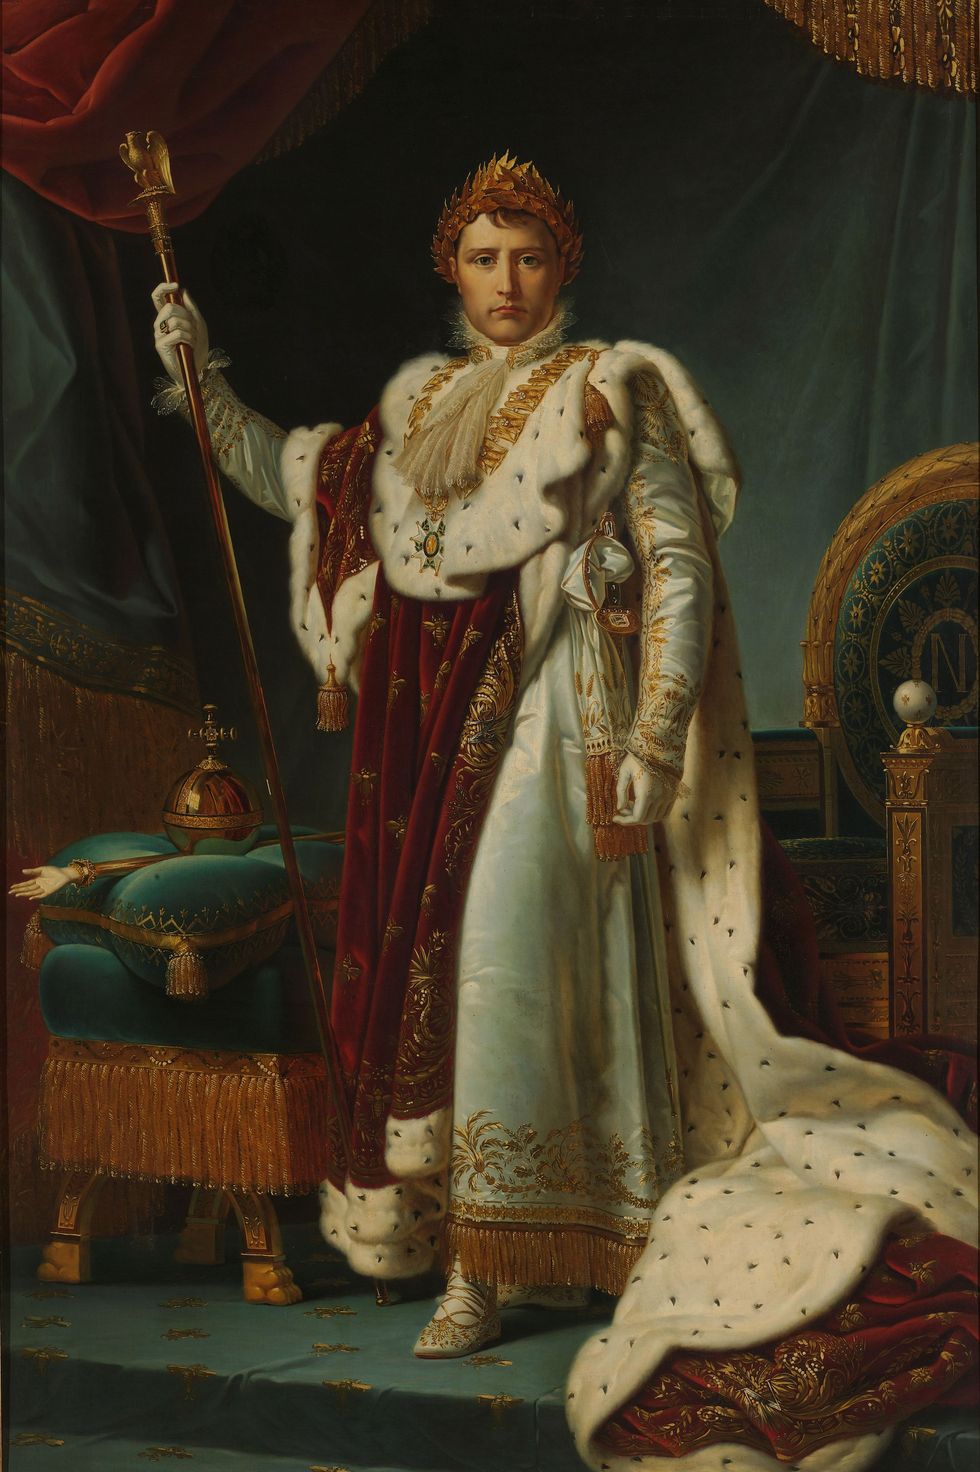 portrait of napoleon bonaparte as emperor napoleon i, he stands next to a throne while wearing a long red and white cape, a regal outfit, and a golden crown, he holds a long golden staff